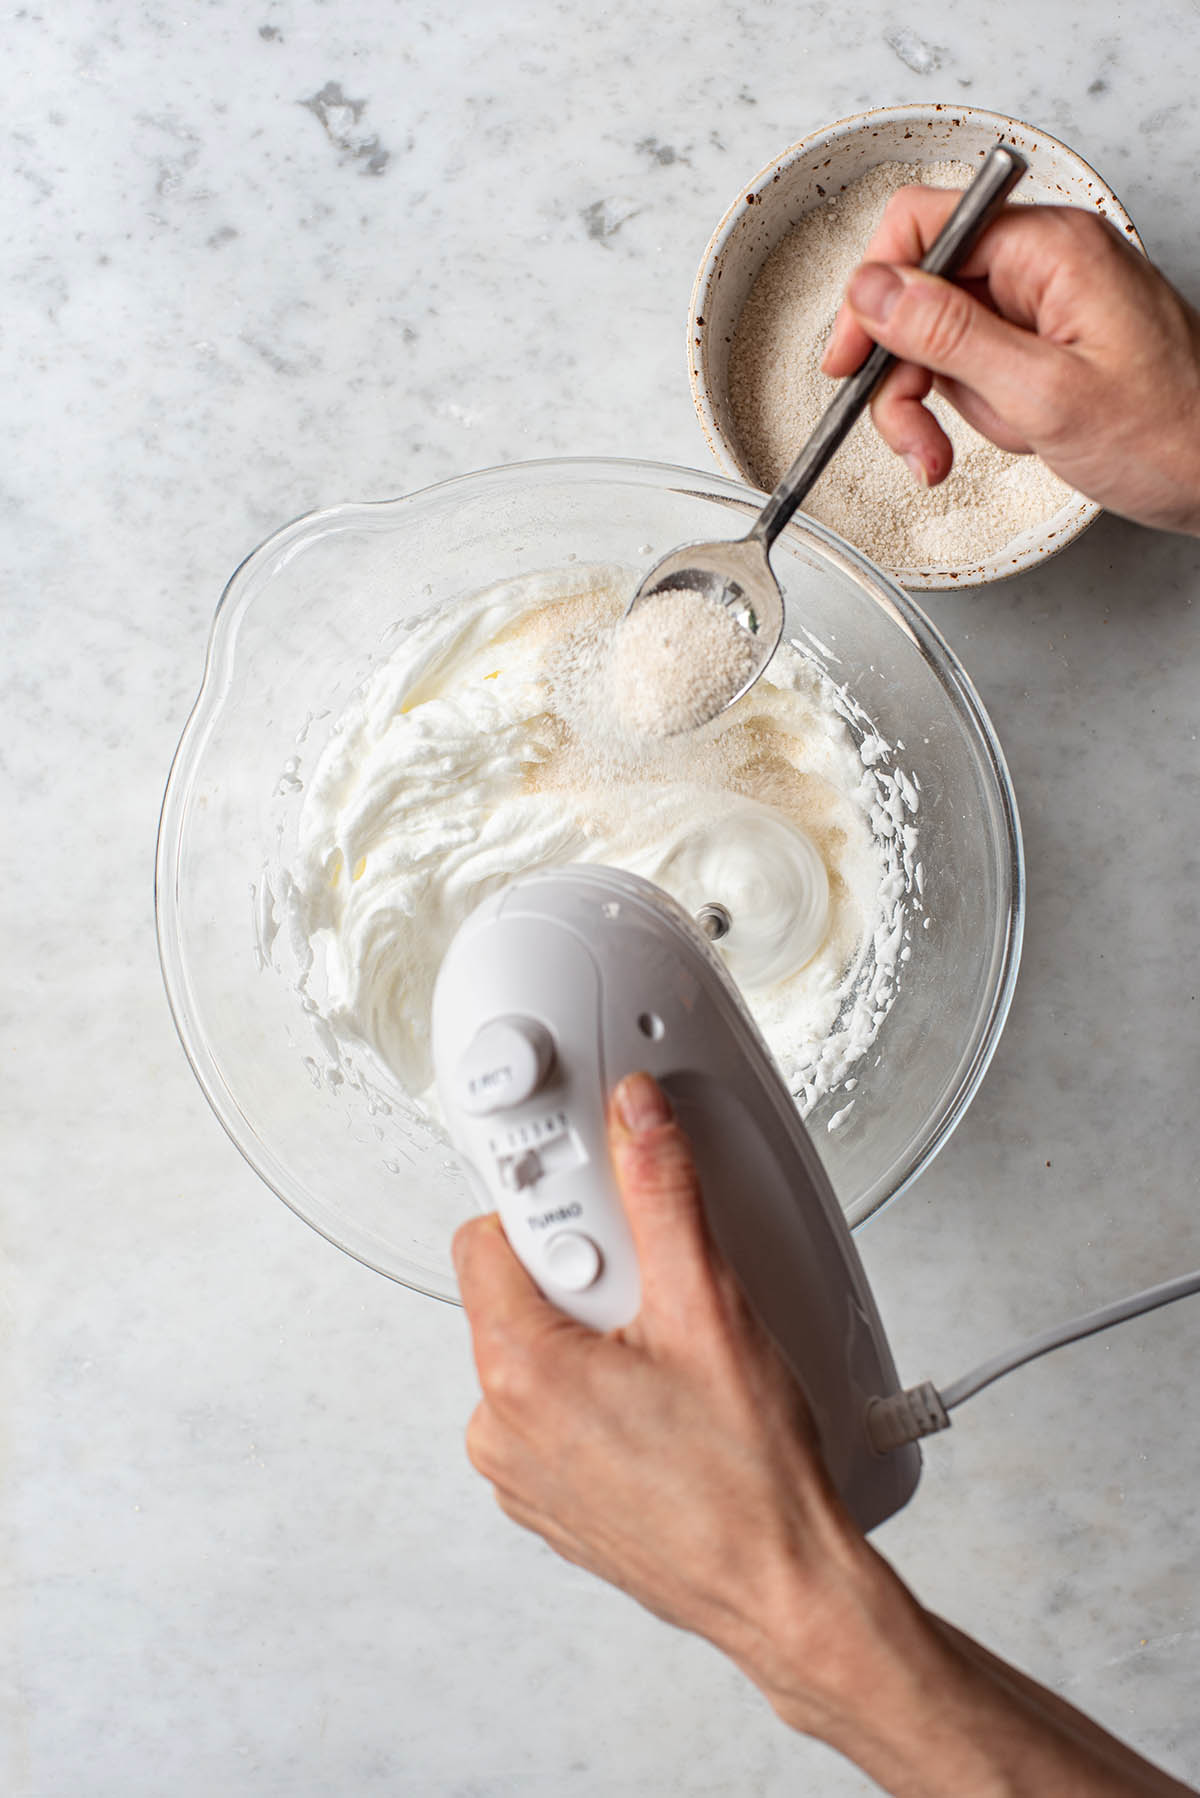 A hand adding a spoonful of sugar to a bowl of meringue while using the other hand to mix with a hand mixer.